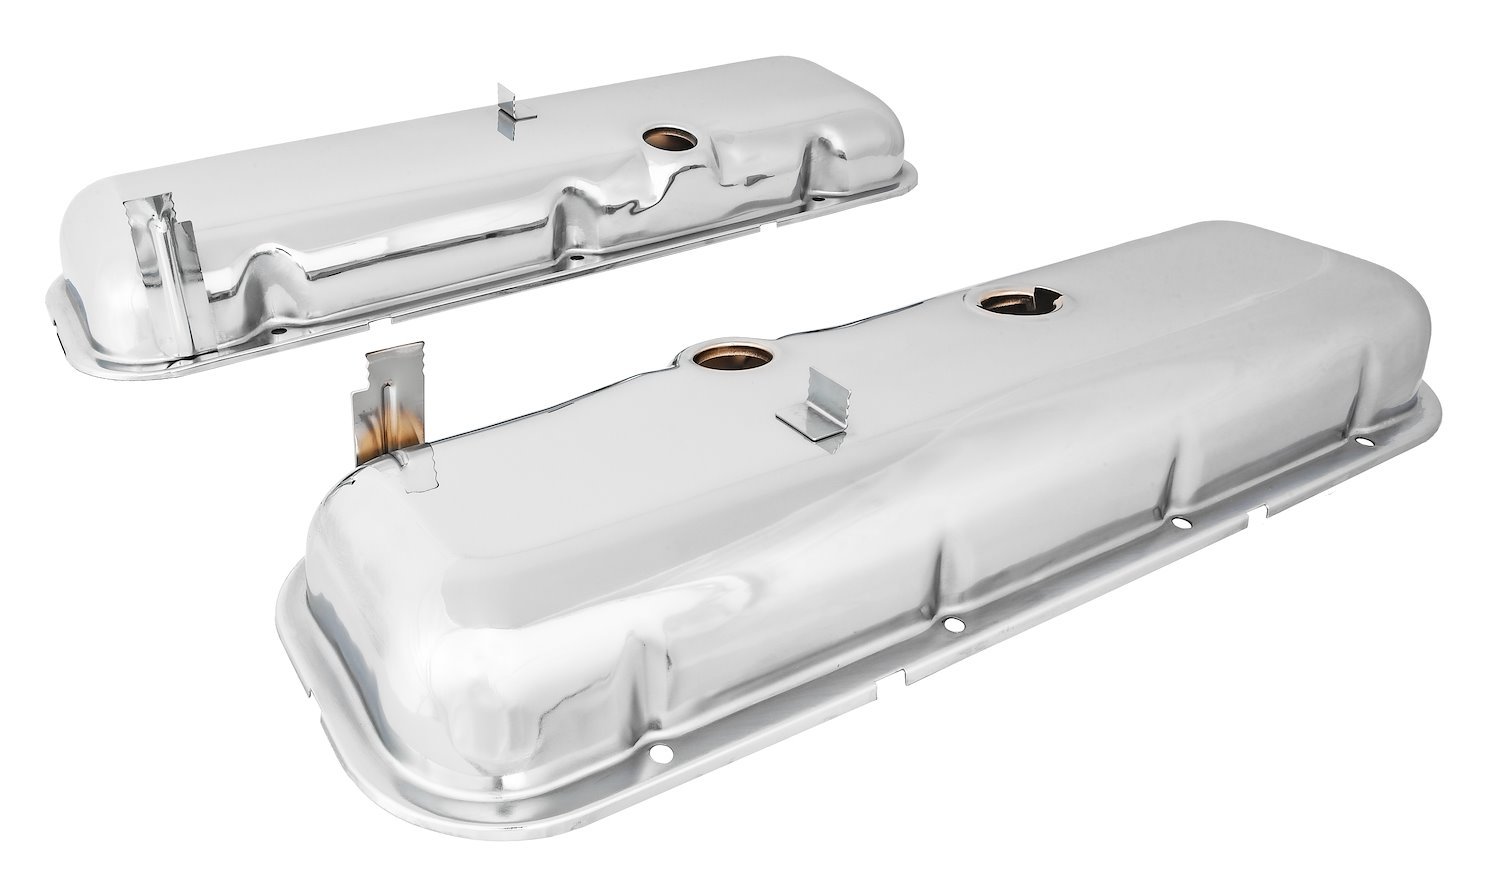 OEM-Style Replacement Valve Covers for 1965-1972 Chevrolet Models w/Big Block 396, 402, 427, 454 Engines [Chrome]